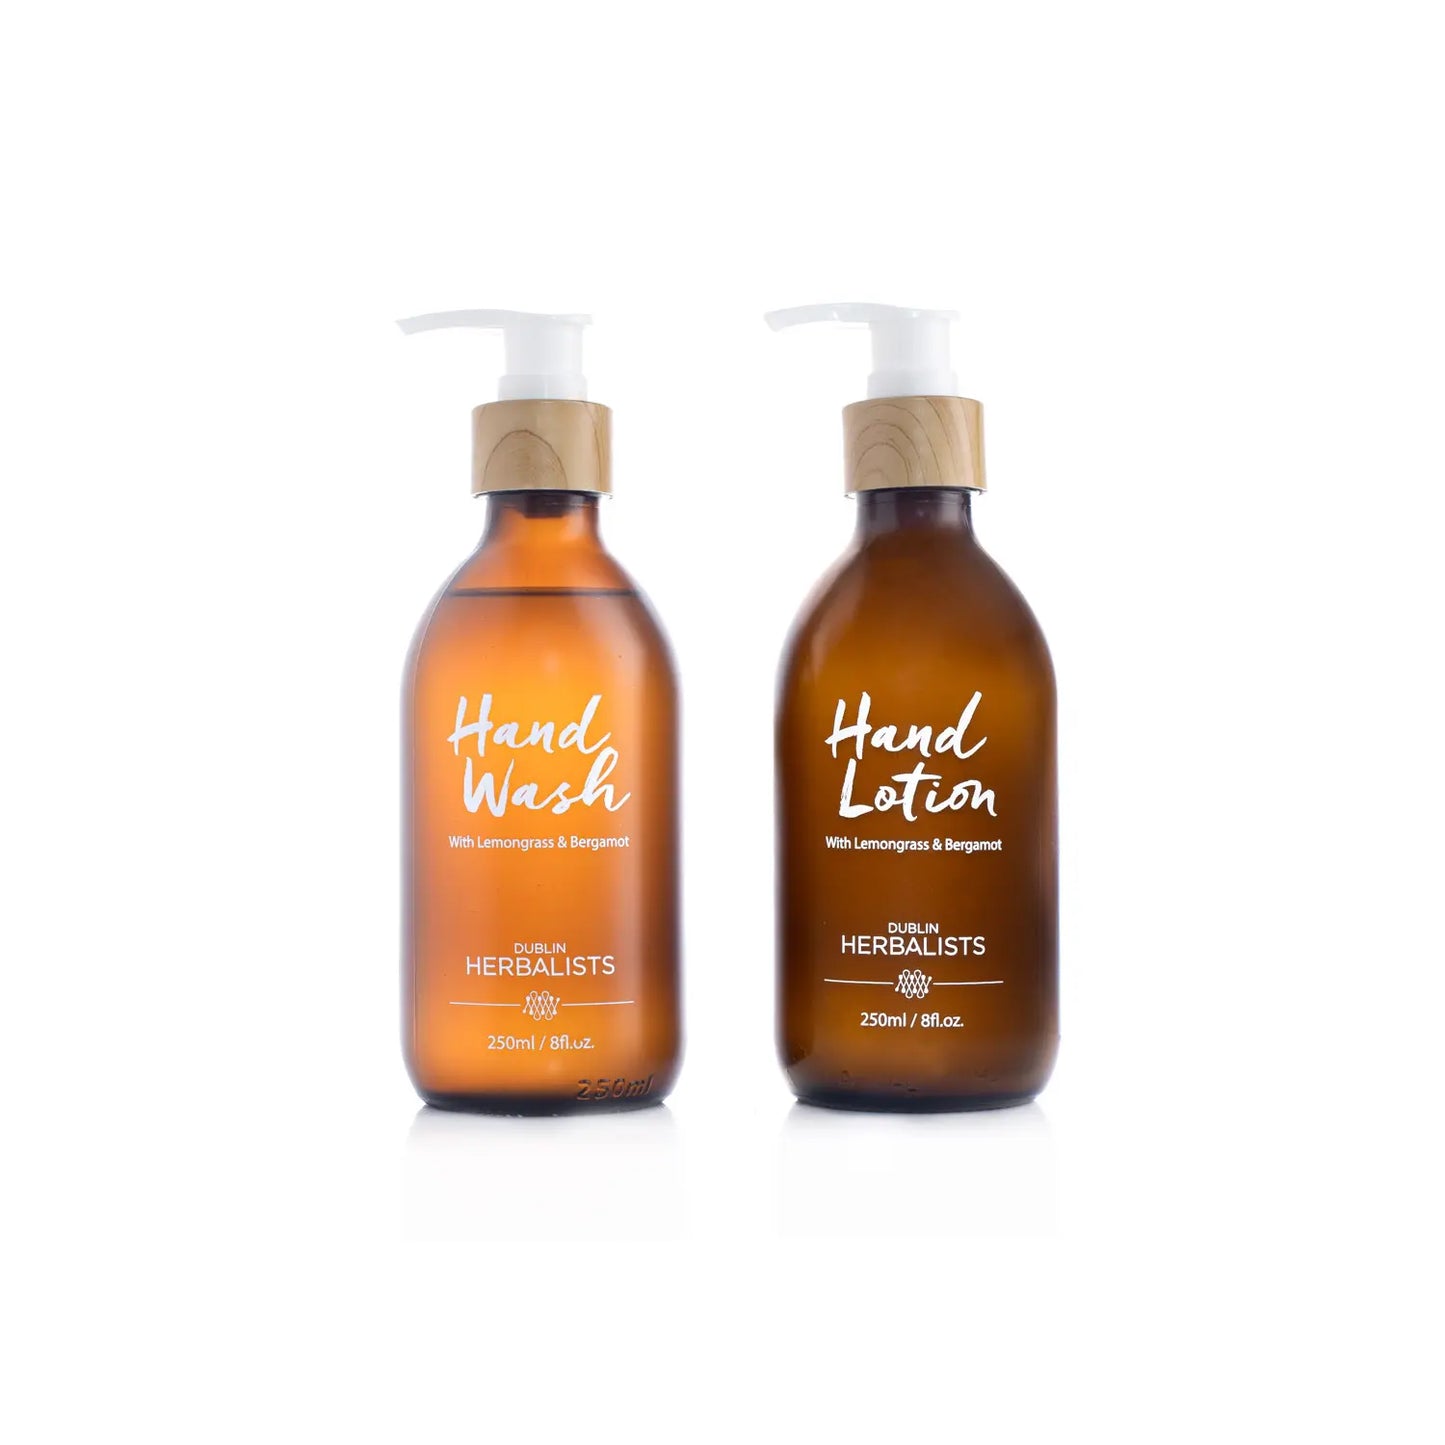 HAND WASH & LOTION GIFT SET - DUBLIN HERBALISTS